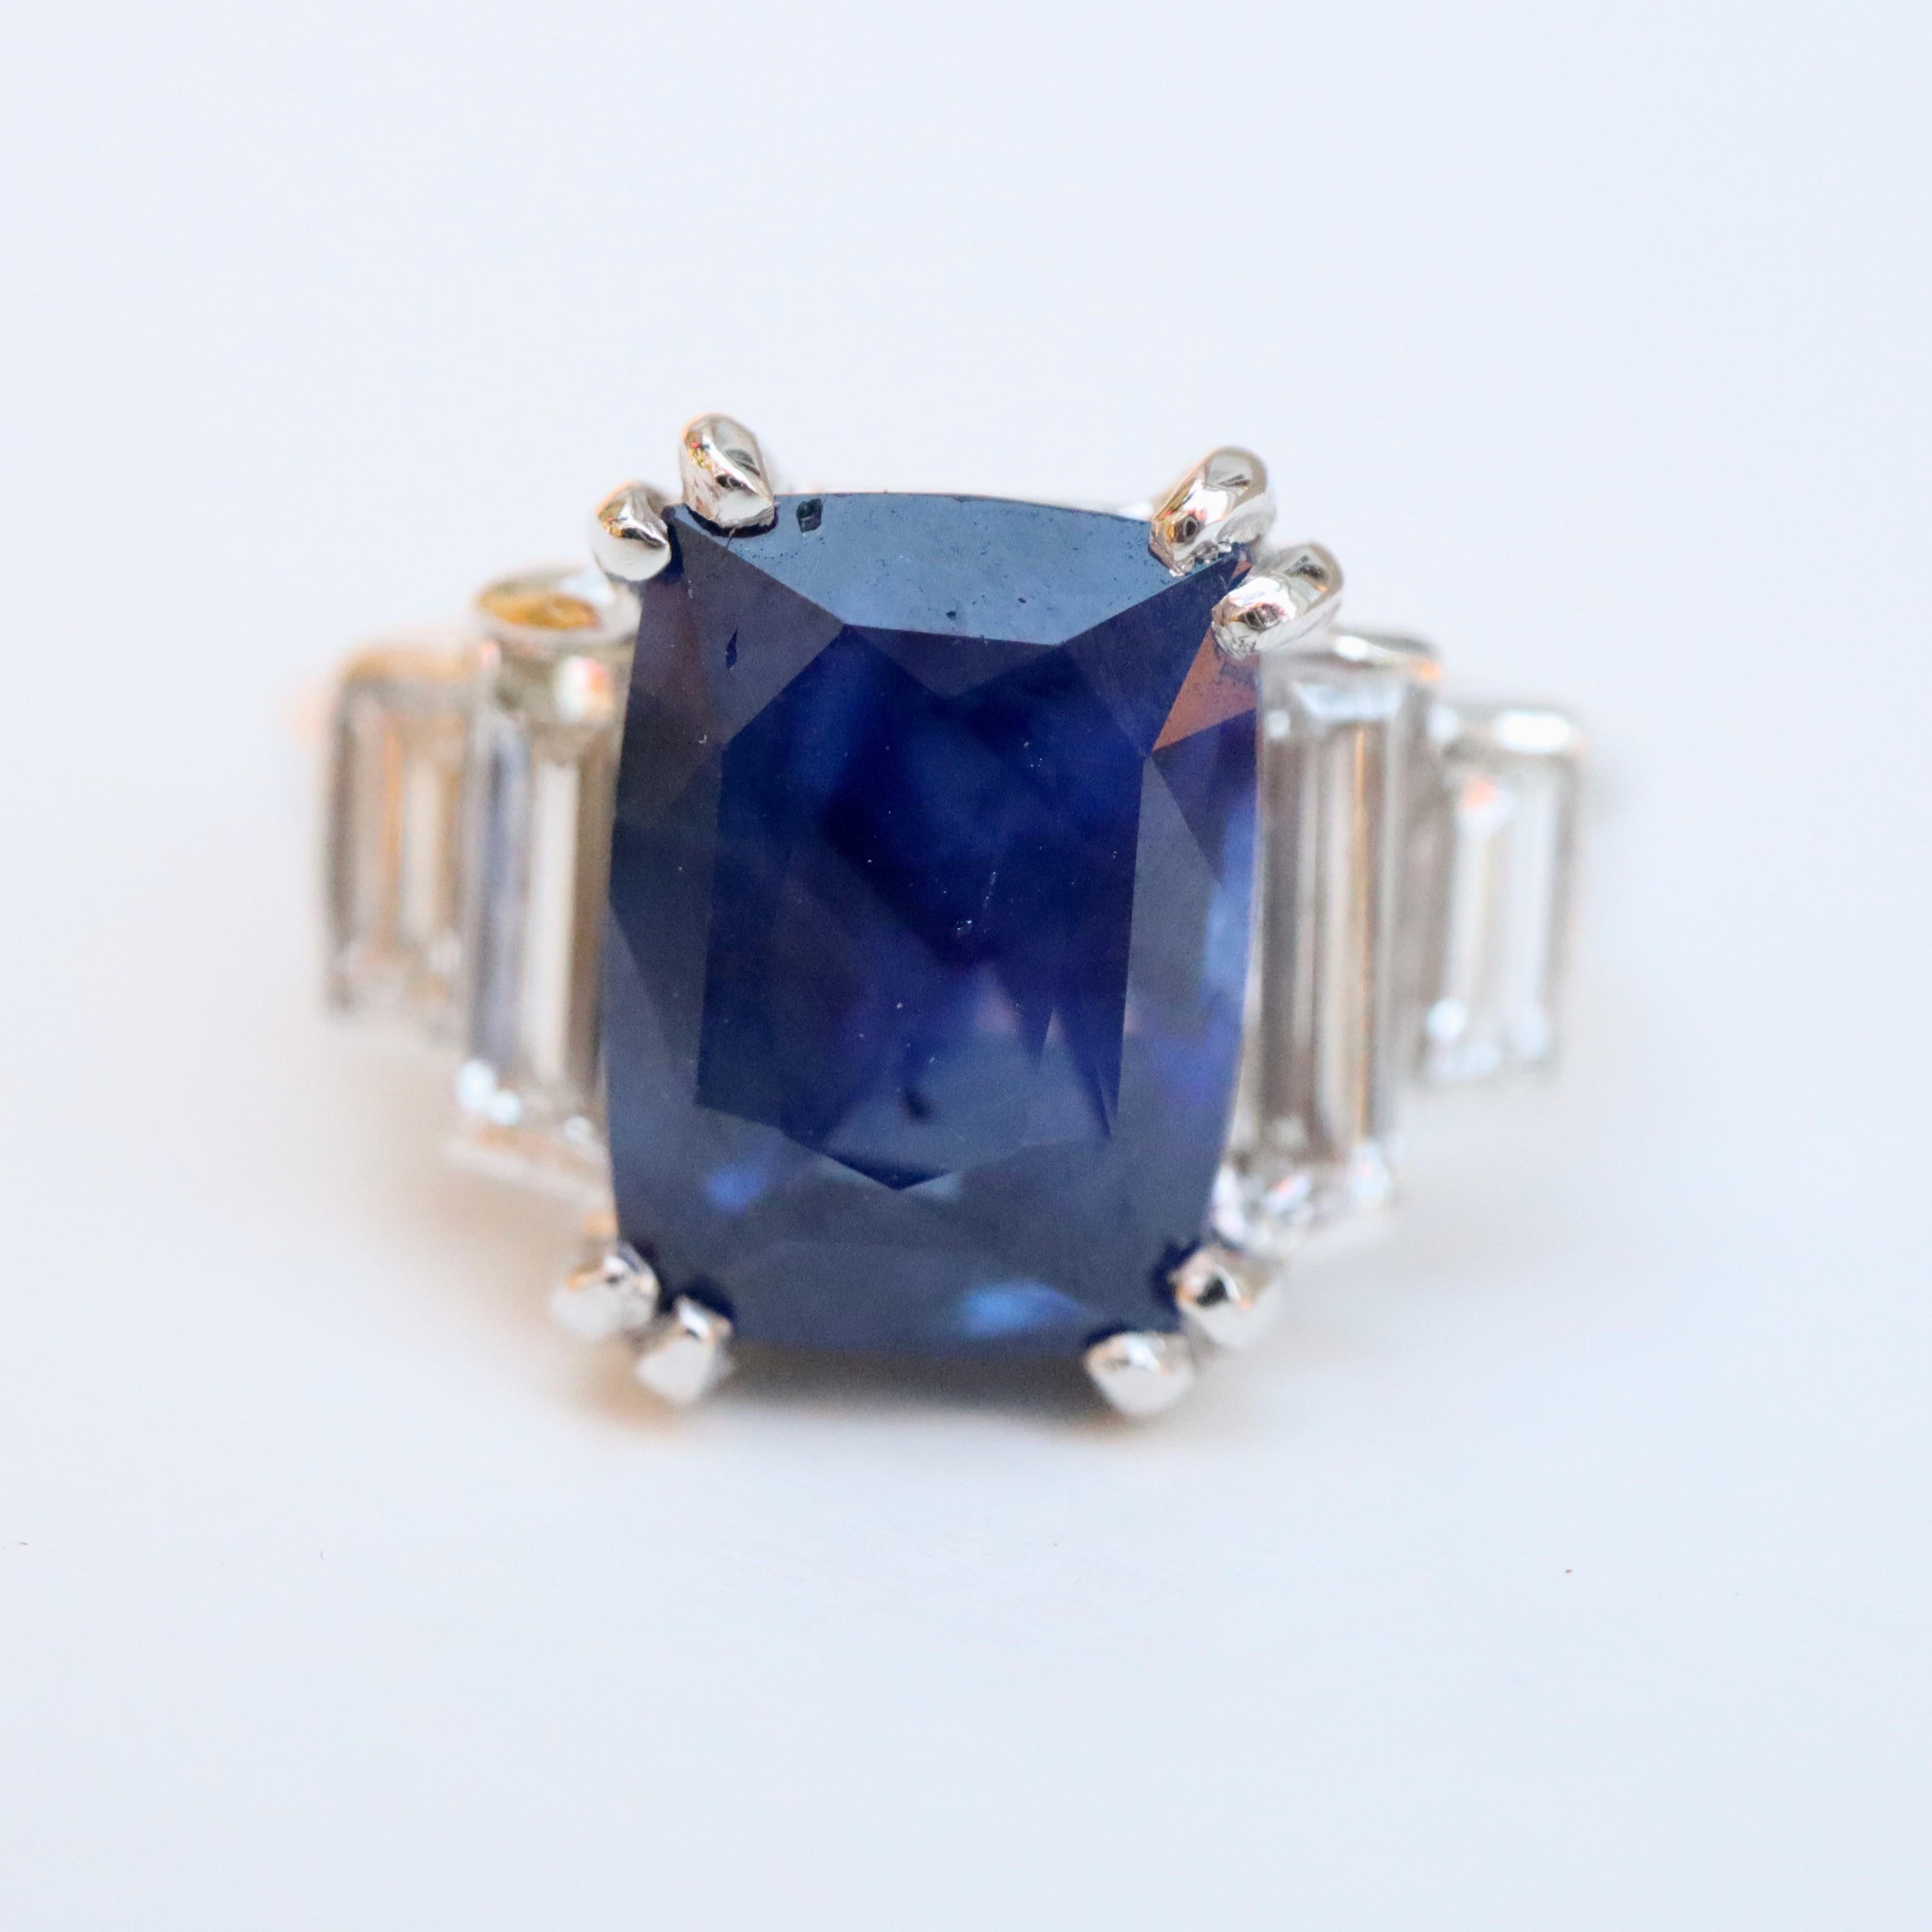 Ceylon Sapphire ring. 18 Carat White Gold Ring set in its Center with a Large Ceylon Sapphire weighing 4.59 Carats set with double Prongs, supported on either side by two Baguette-cut Diamonds approximately 0.15 to 0.2 Carat.
Total Diamond Weight: